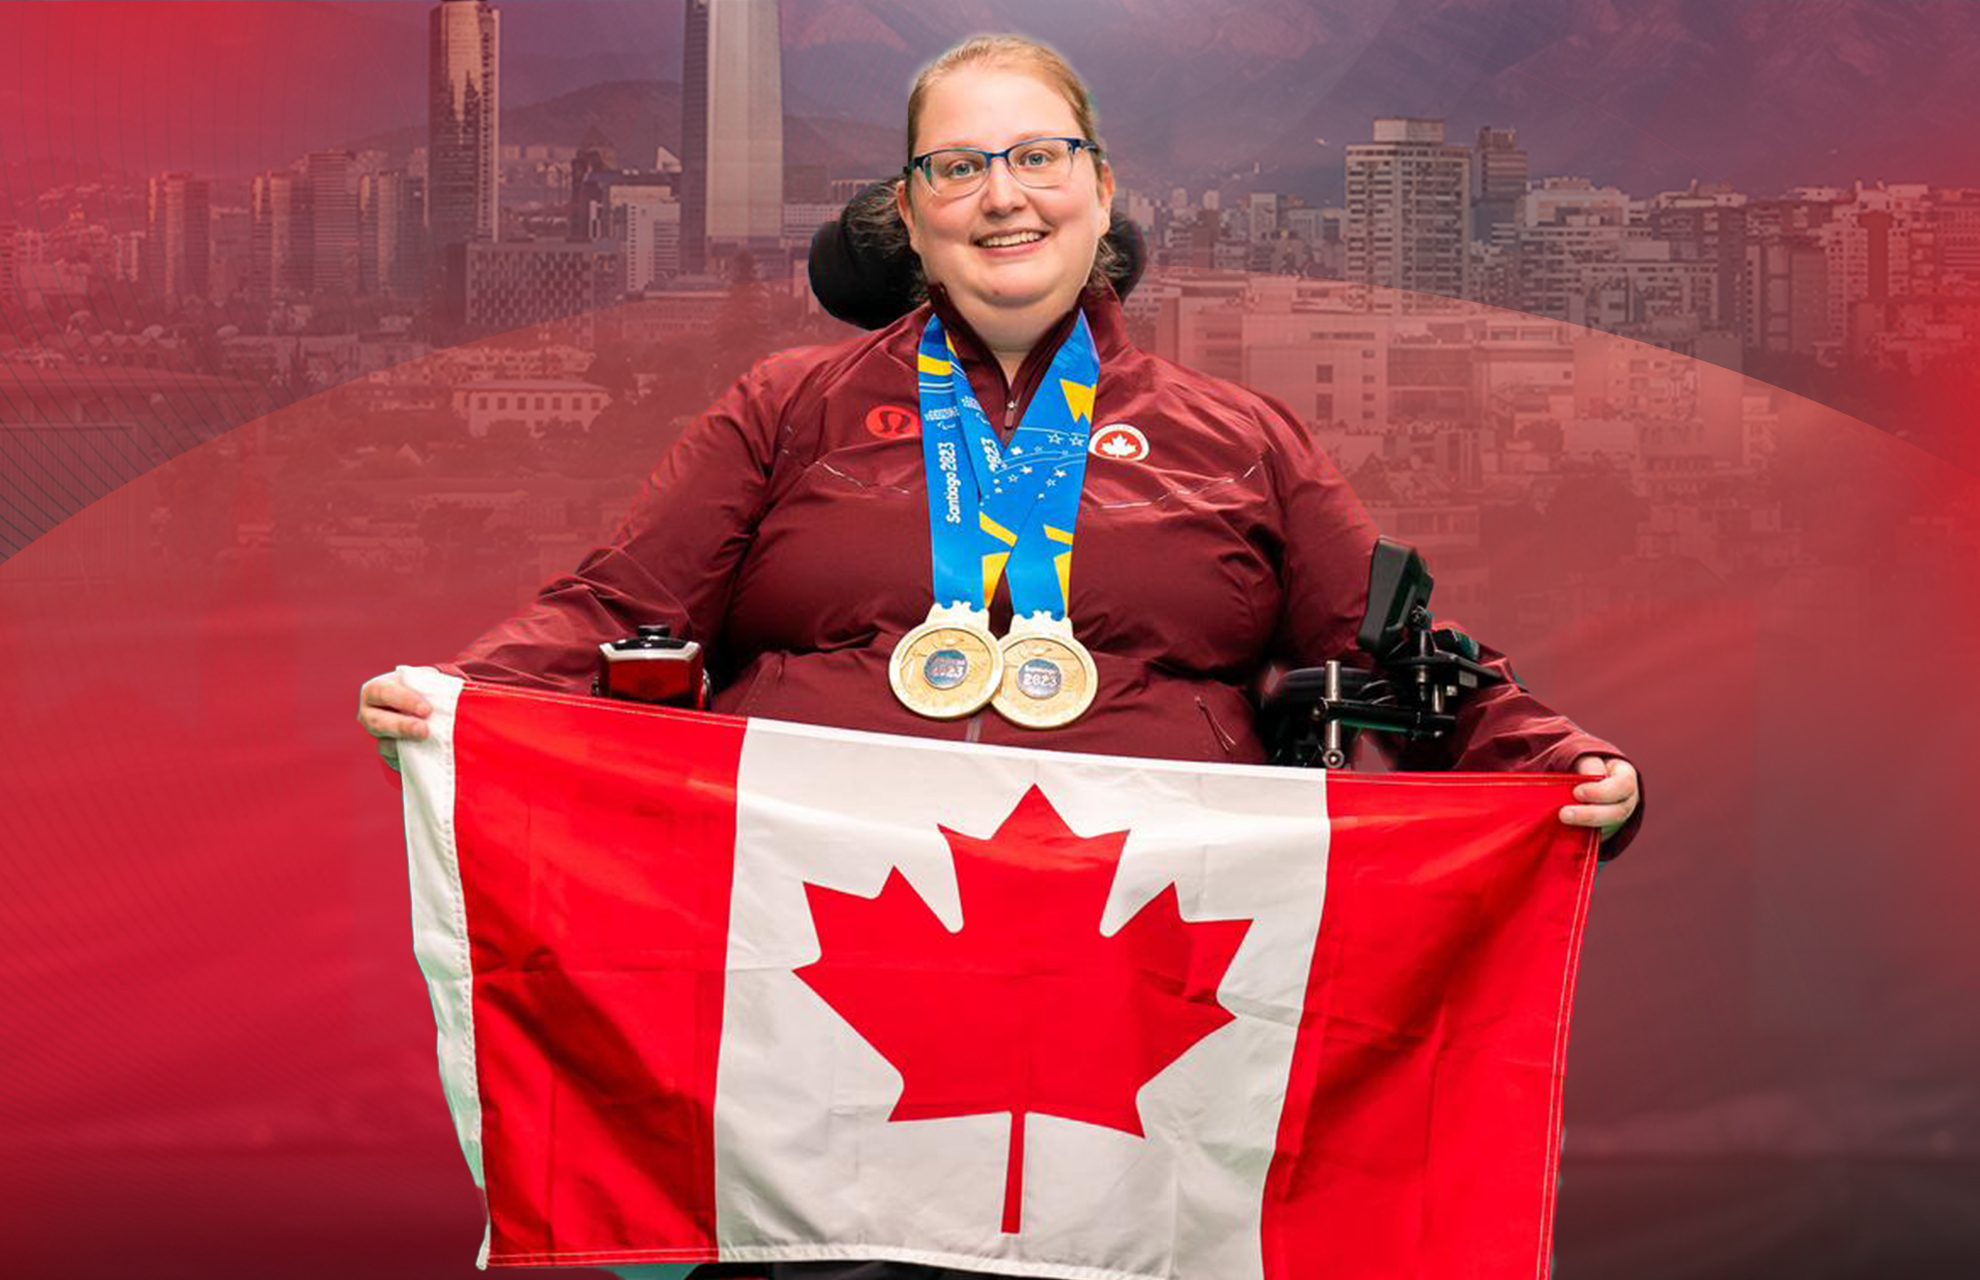 Alison Levine wearing her gold medals, smiling, holding the Canadian flag